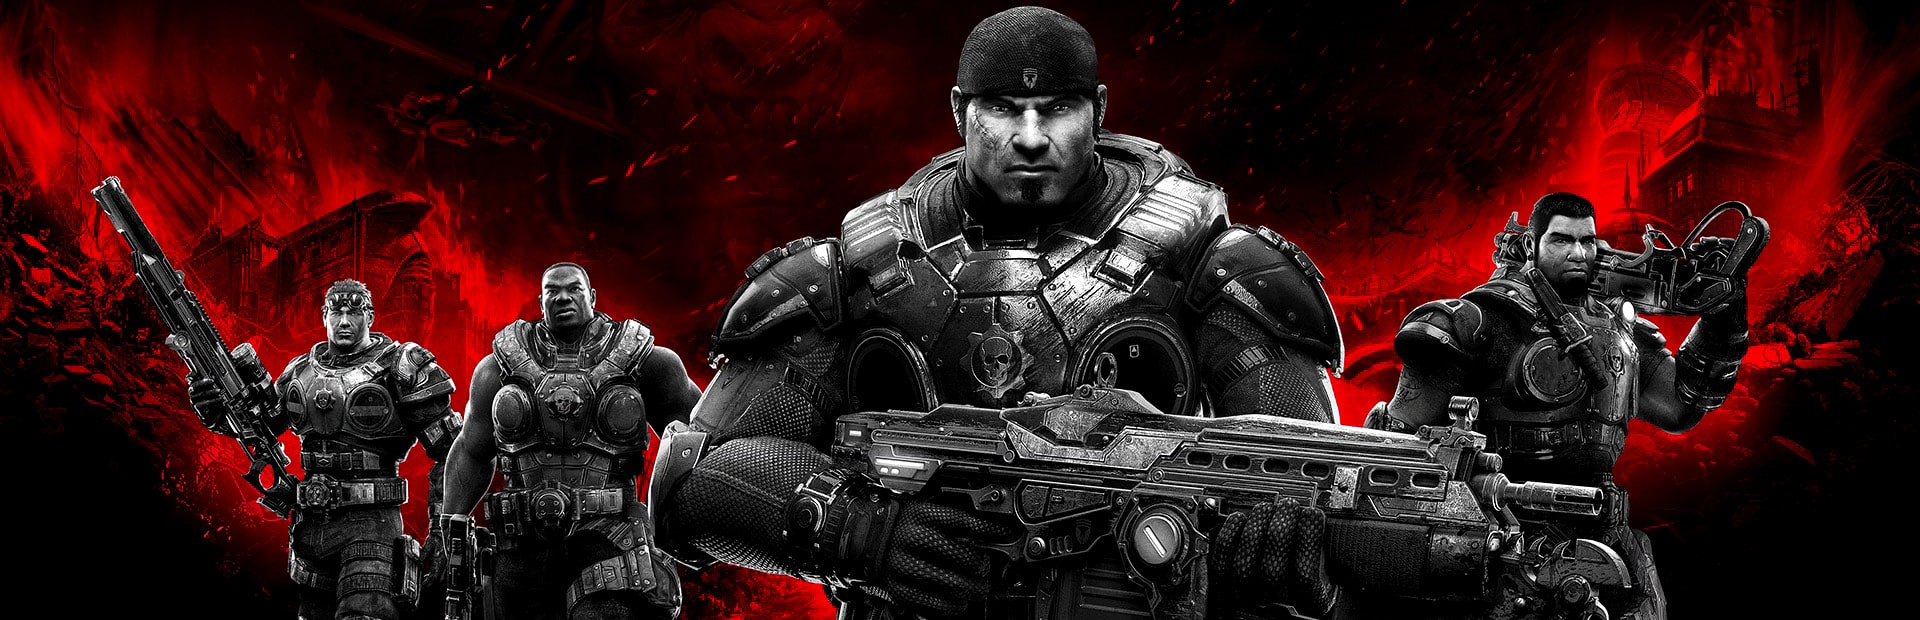 Gears of War: Ultimate Edition | Xbox One Digital Download | Wallpaper